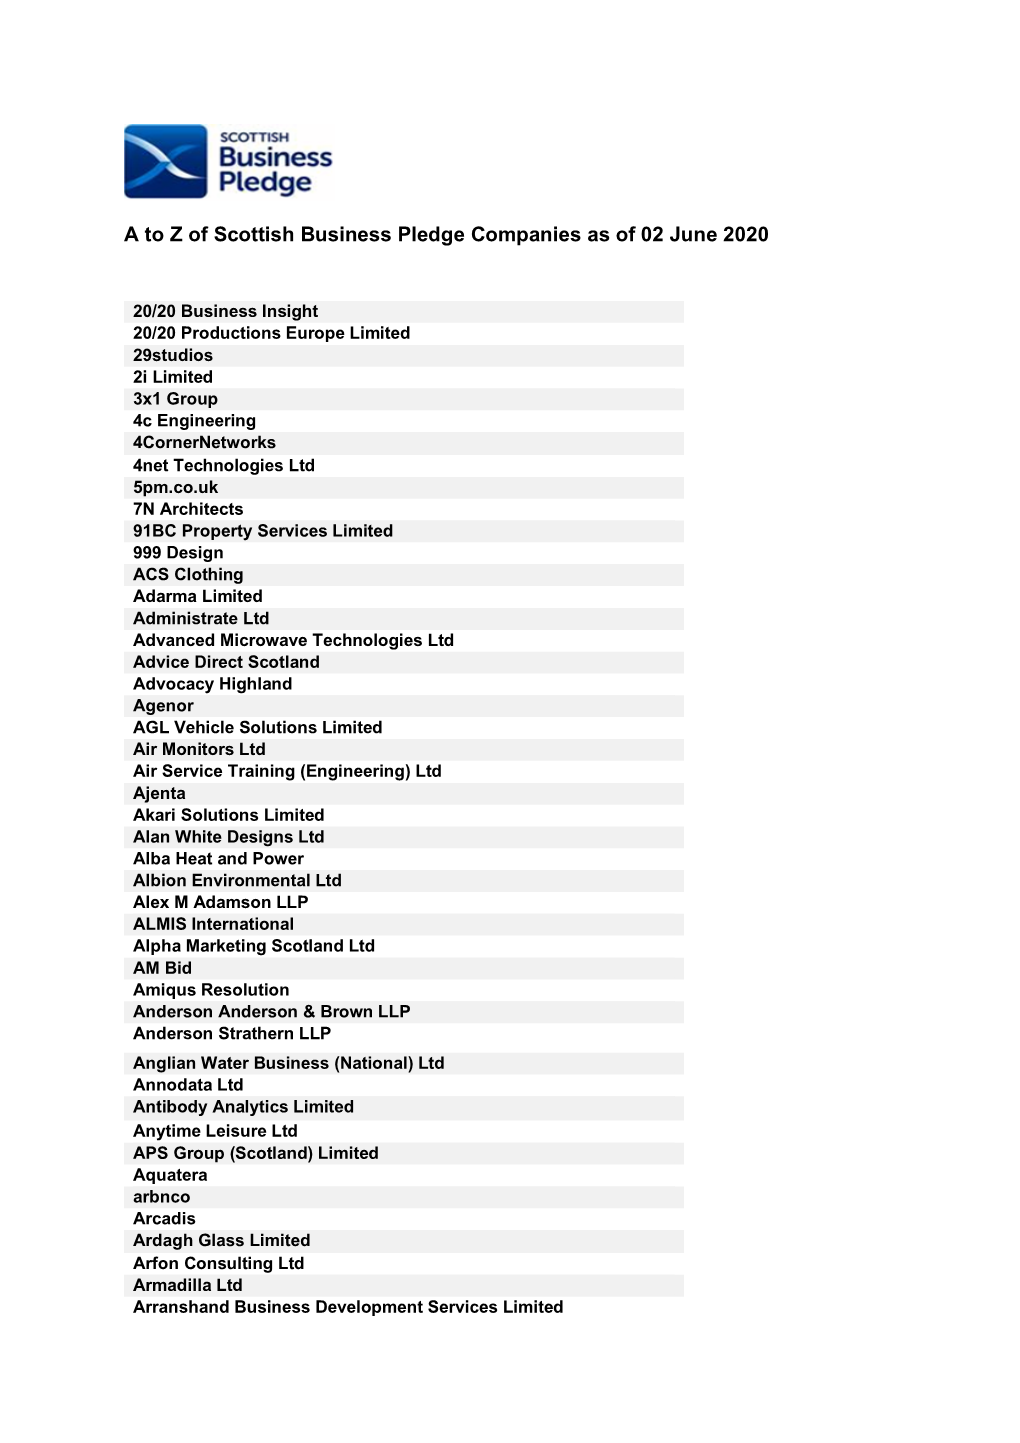 A to Z of Scottish Business Pledge Companies As of 02 June 2020